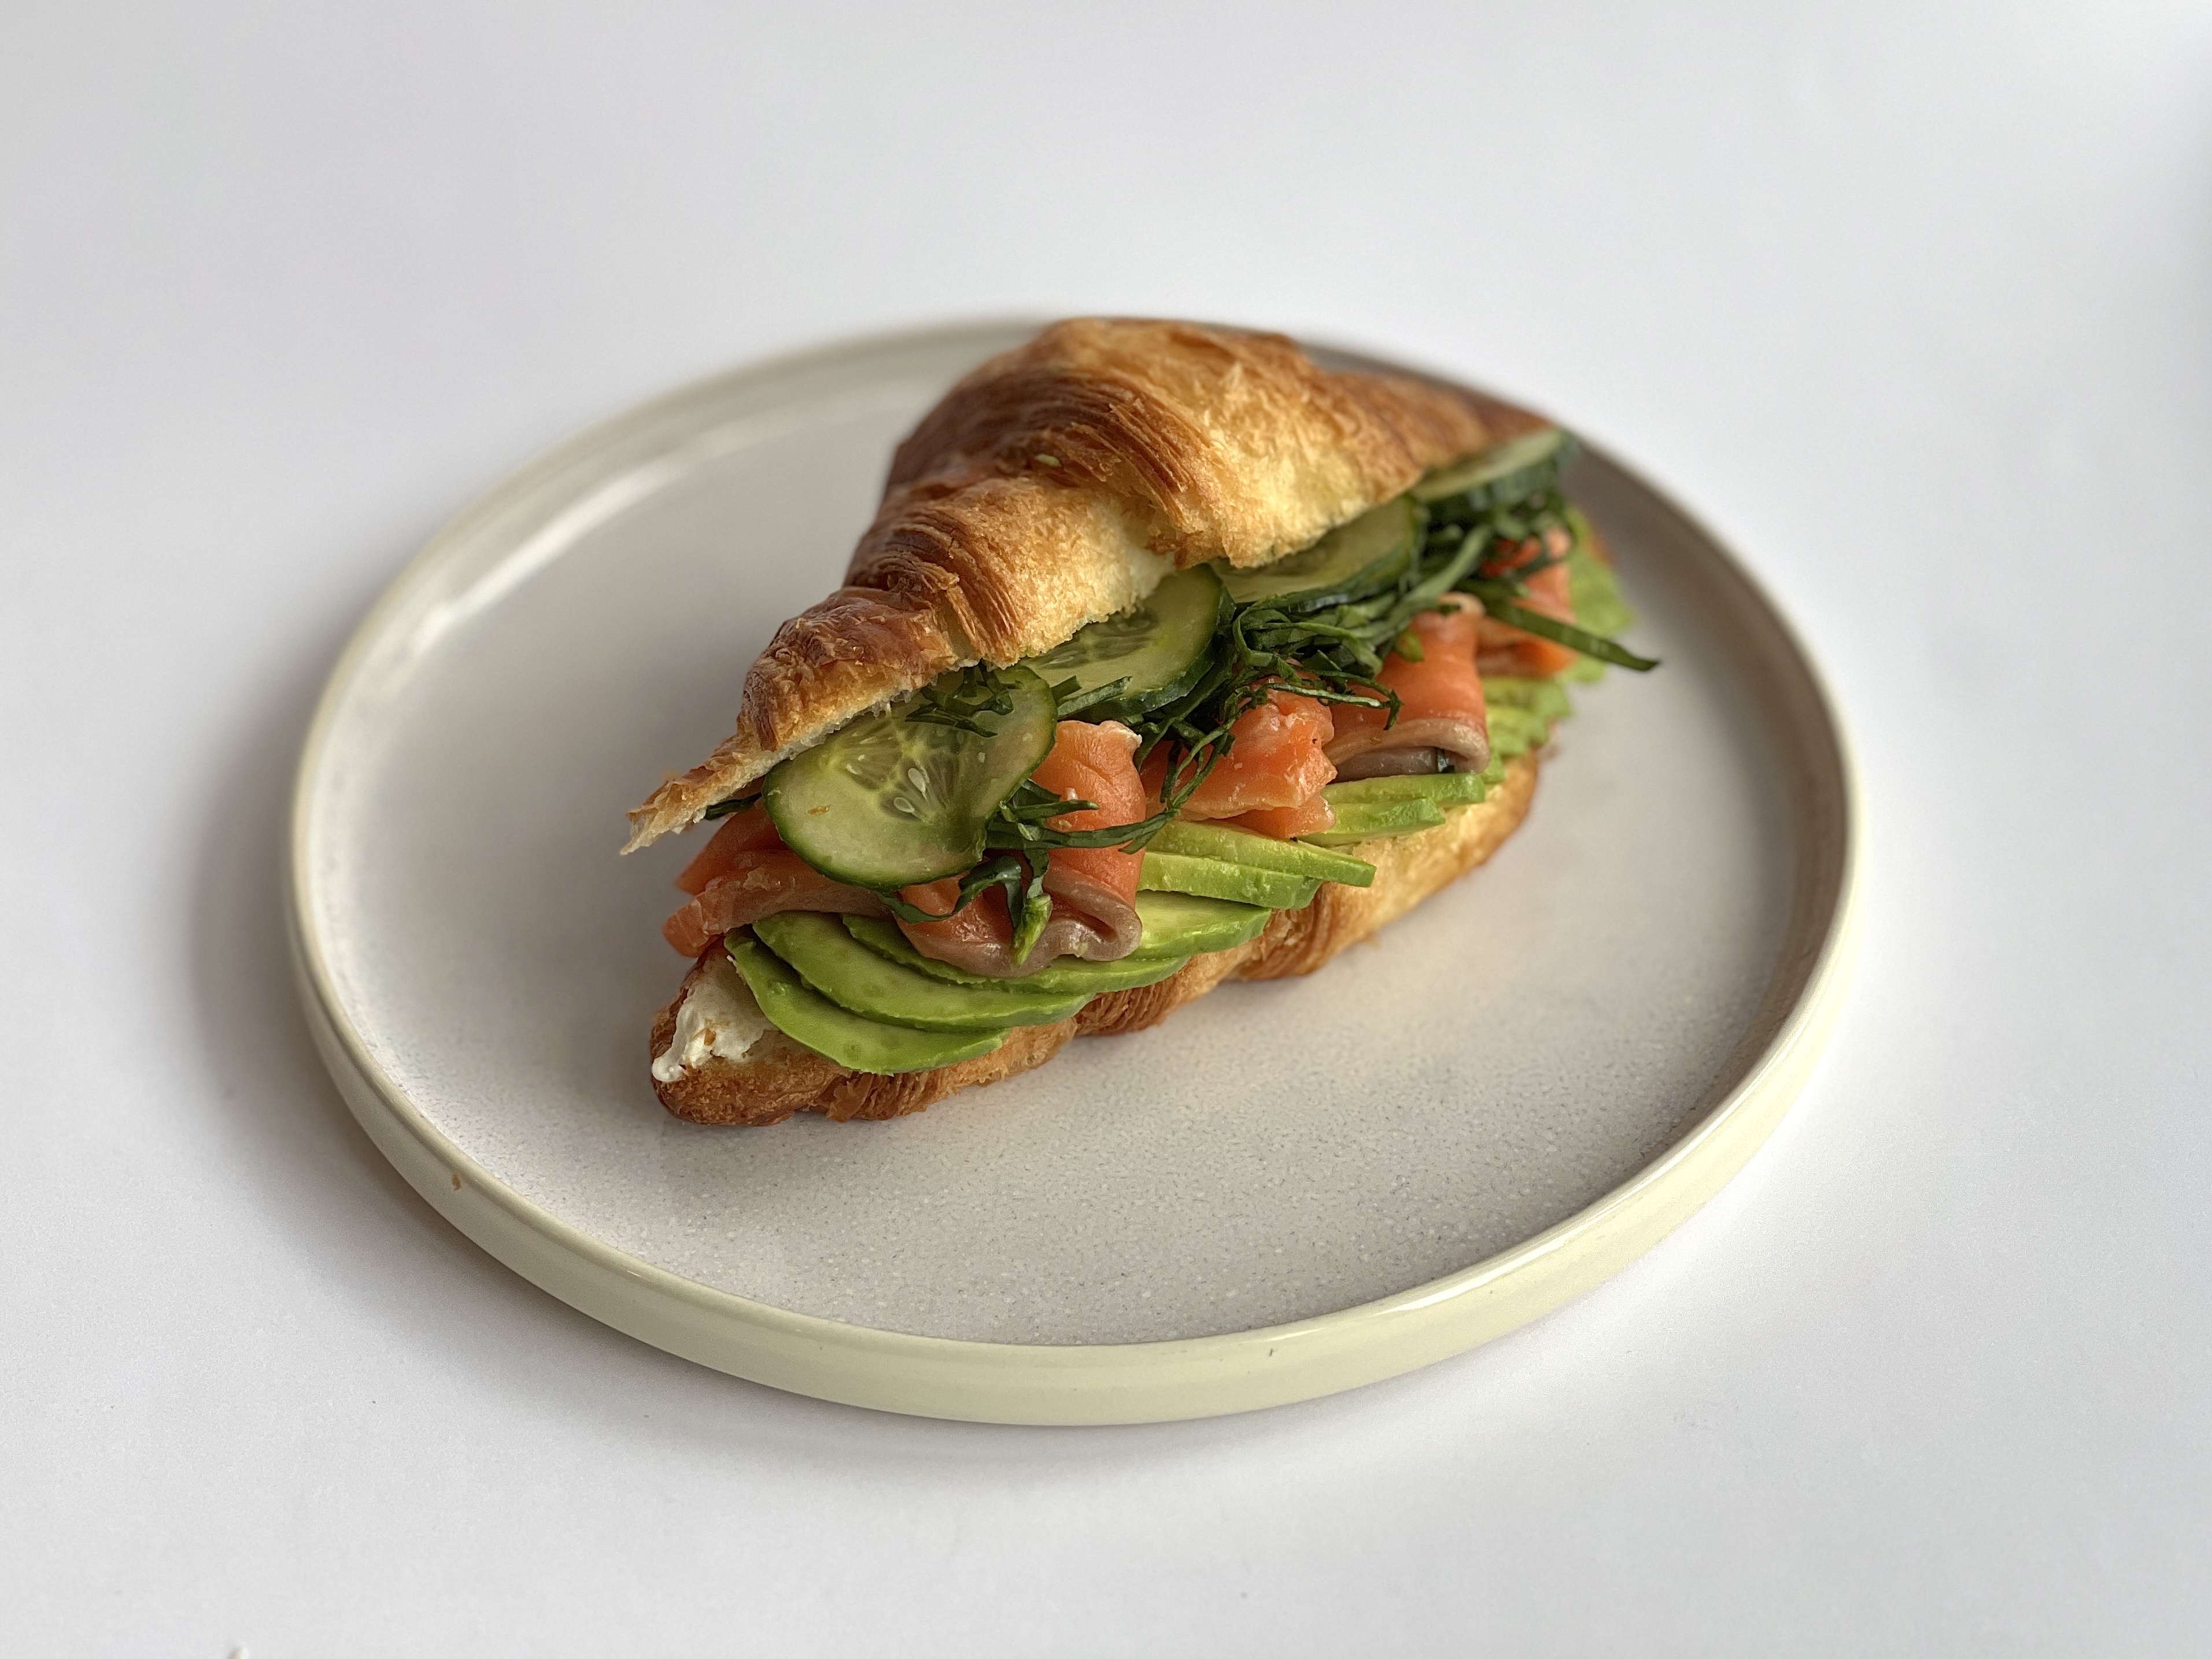 Croissant, salmon, avocado, ginger cucumber, spinach<br><br>